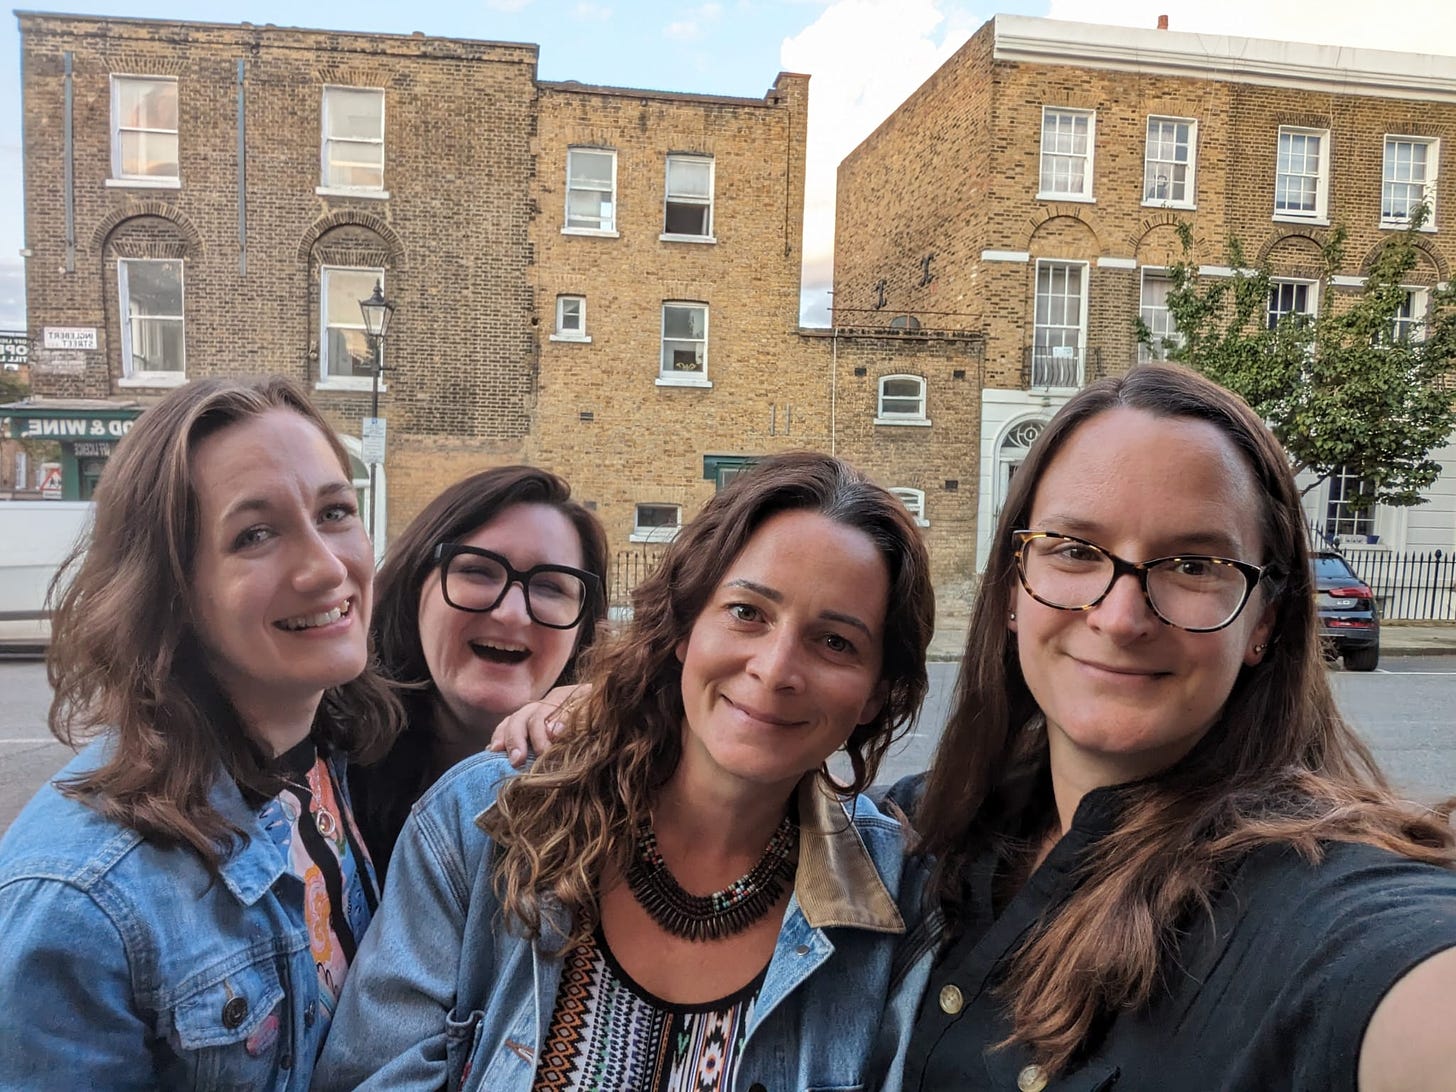 Four white women with brown hair stand in front of some lovely very expensive Londony buiildings. Francesca Lawson, Bonnie Harrington, Sophie Cross and Mel Barfield